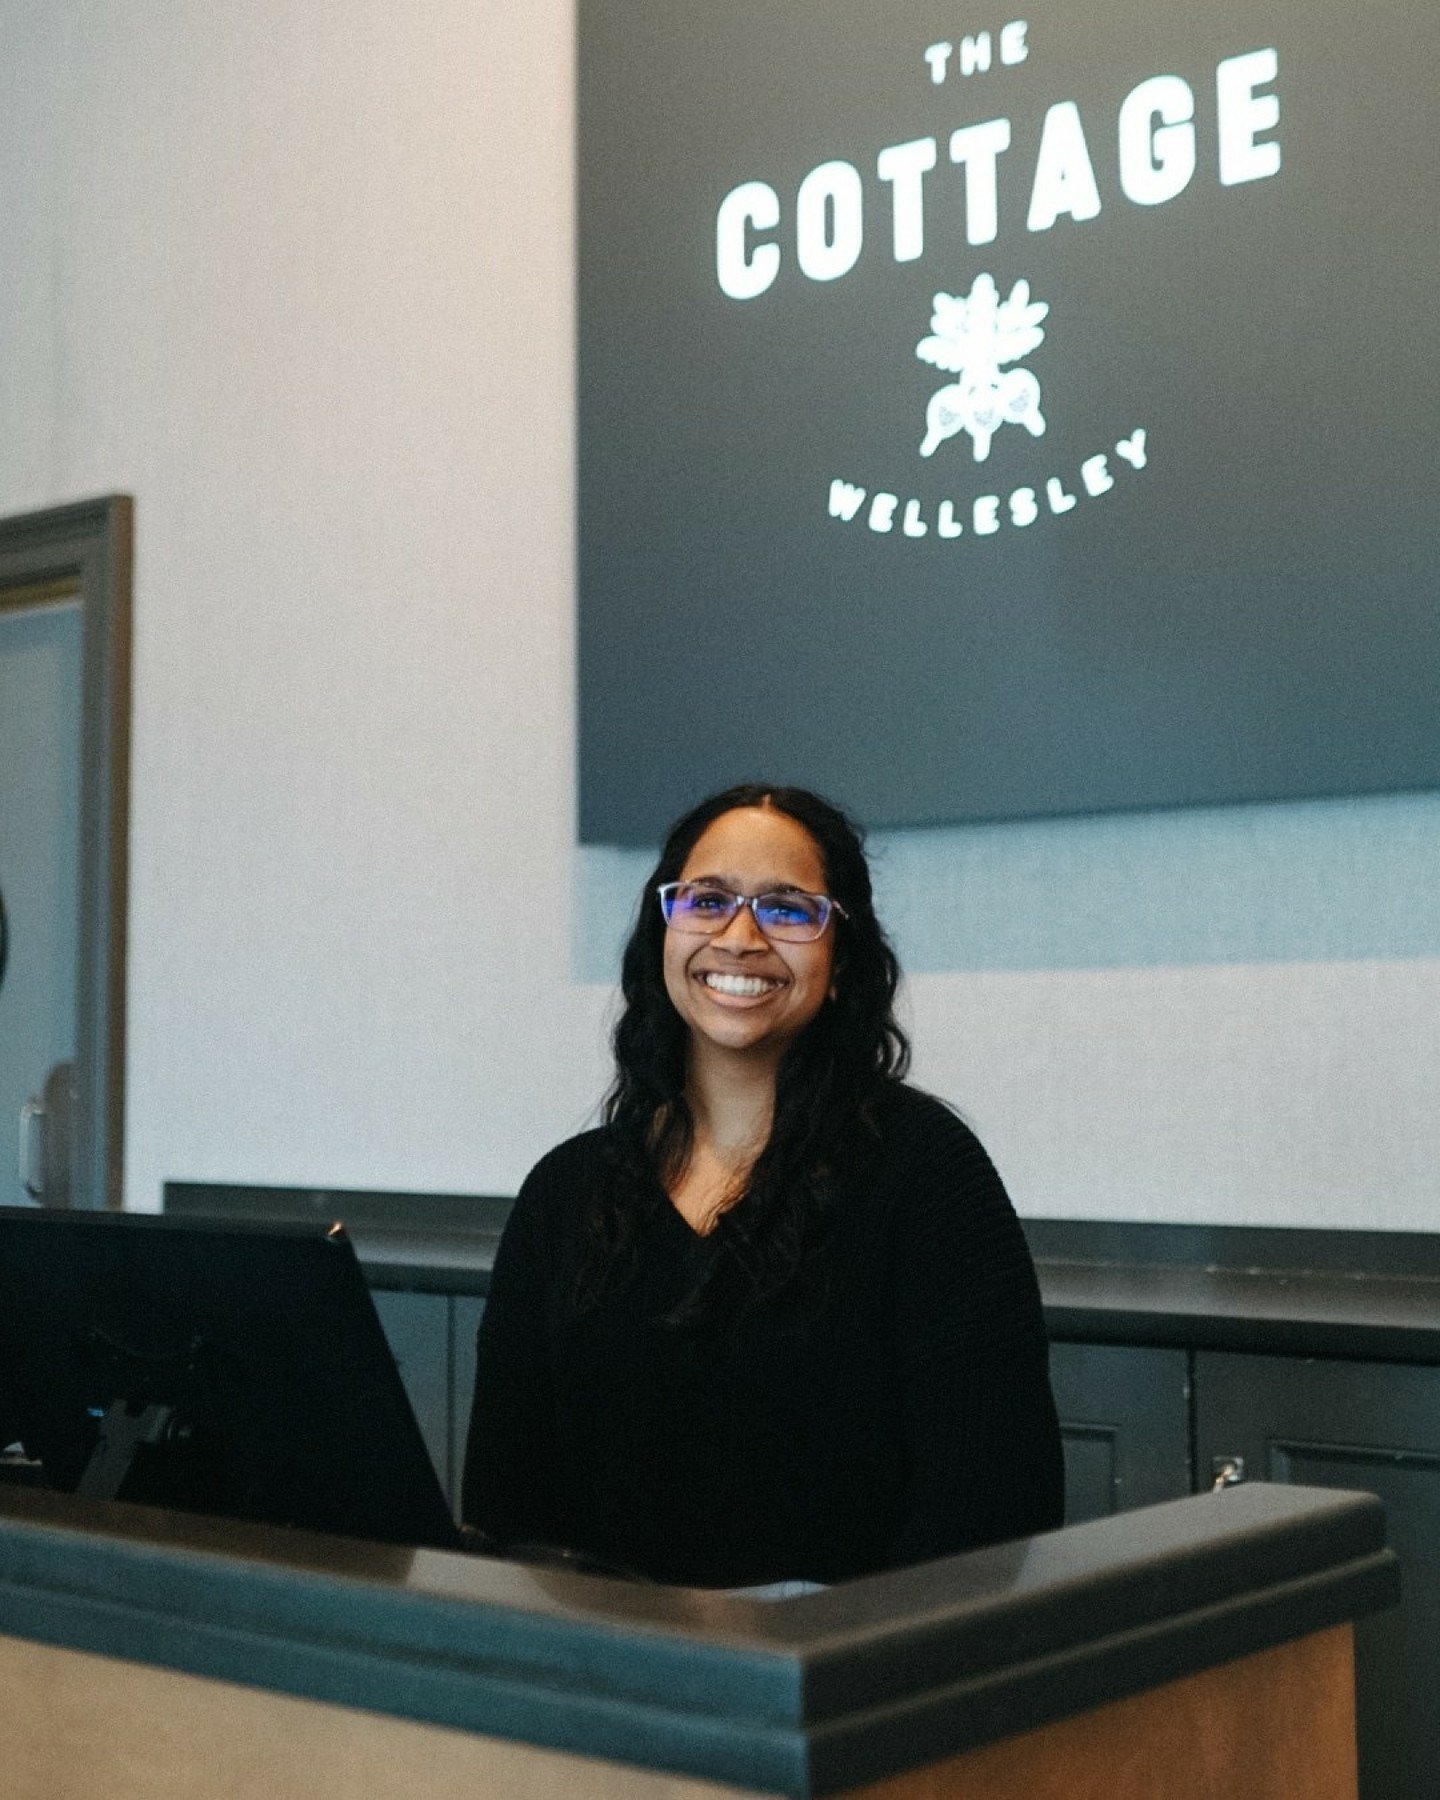 Step into our world at The Cottage... 💙

Our friendly staff not only welcomes you with warmth and a smile, but we also serve up our culinary delights with flair, and shake up our innovative cocktails just for you!

Our community means the world to u